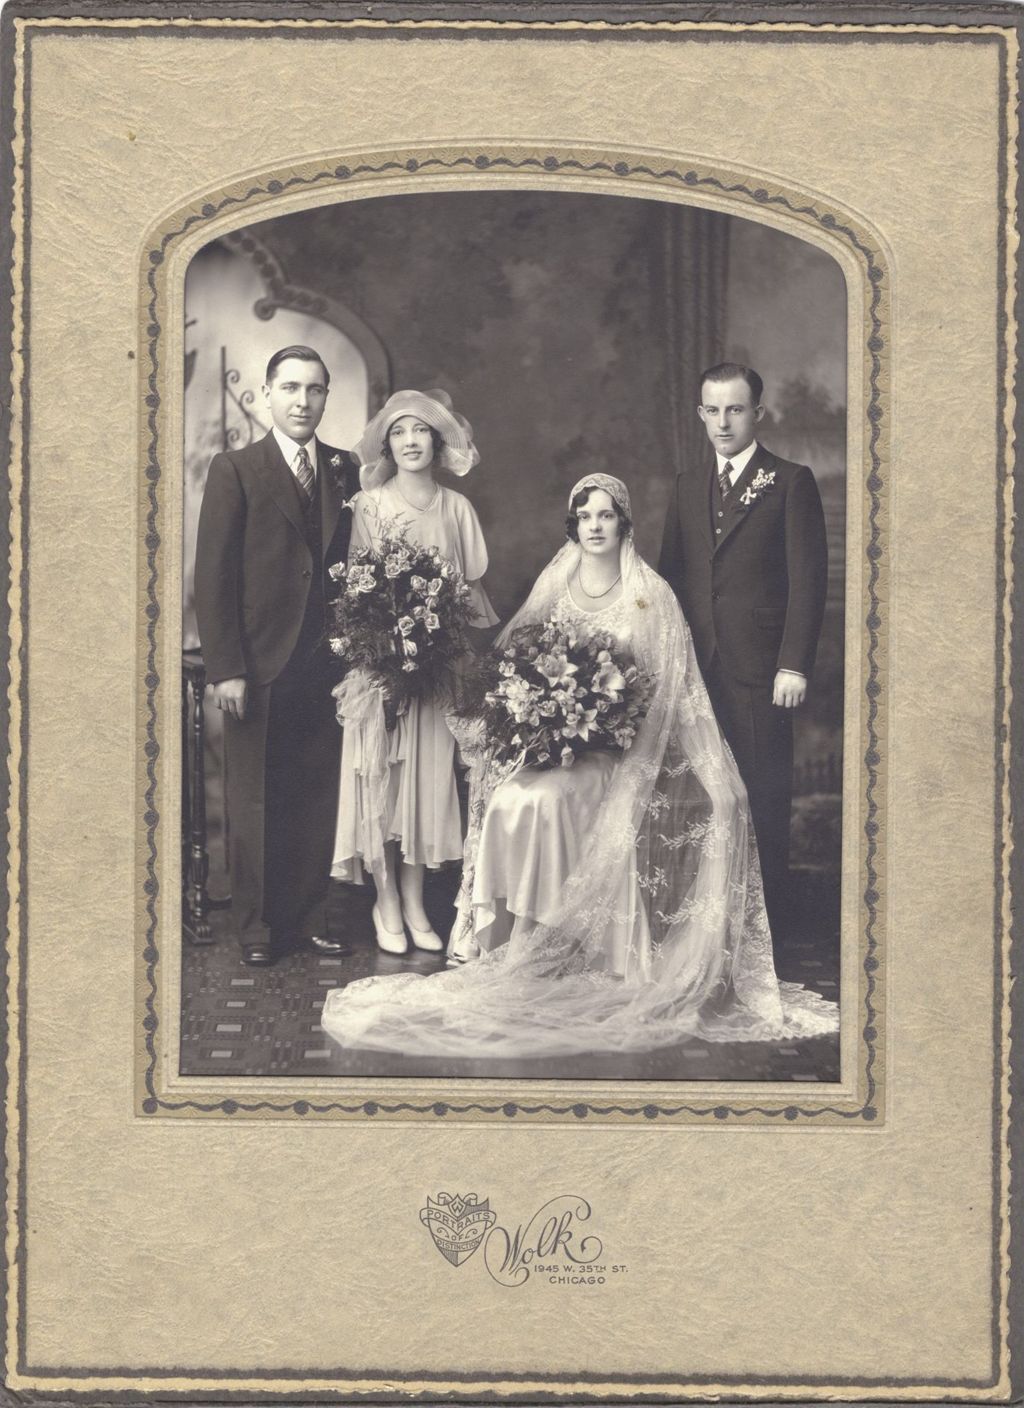 Miniature of Fred Blaeser's wedding day